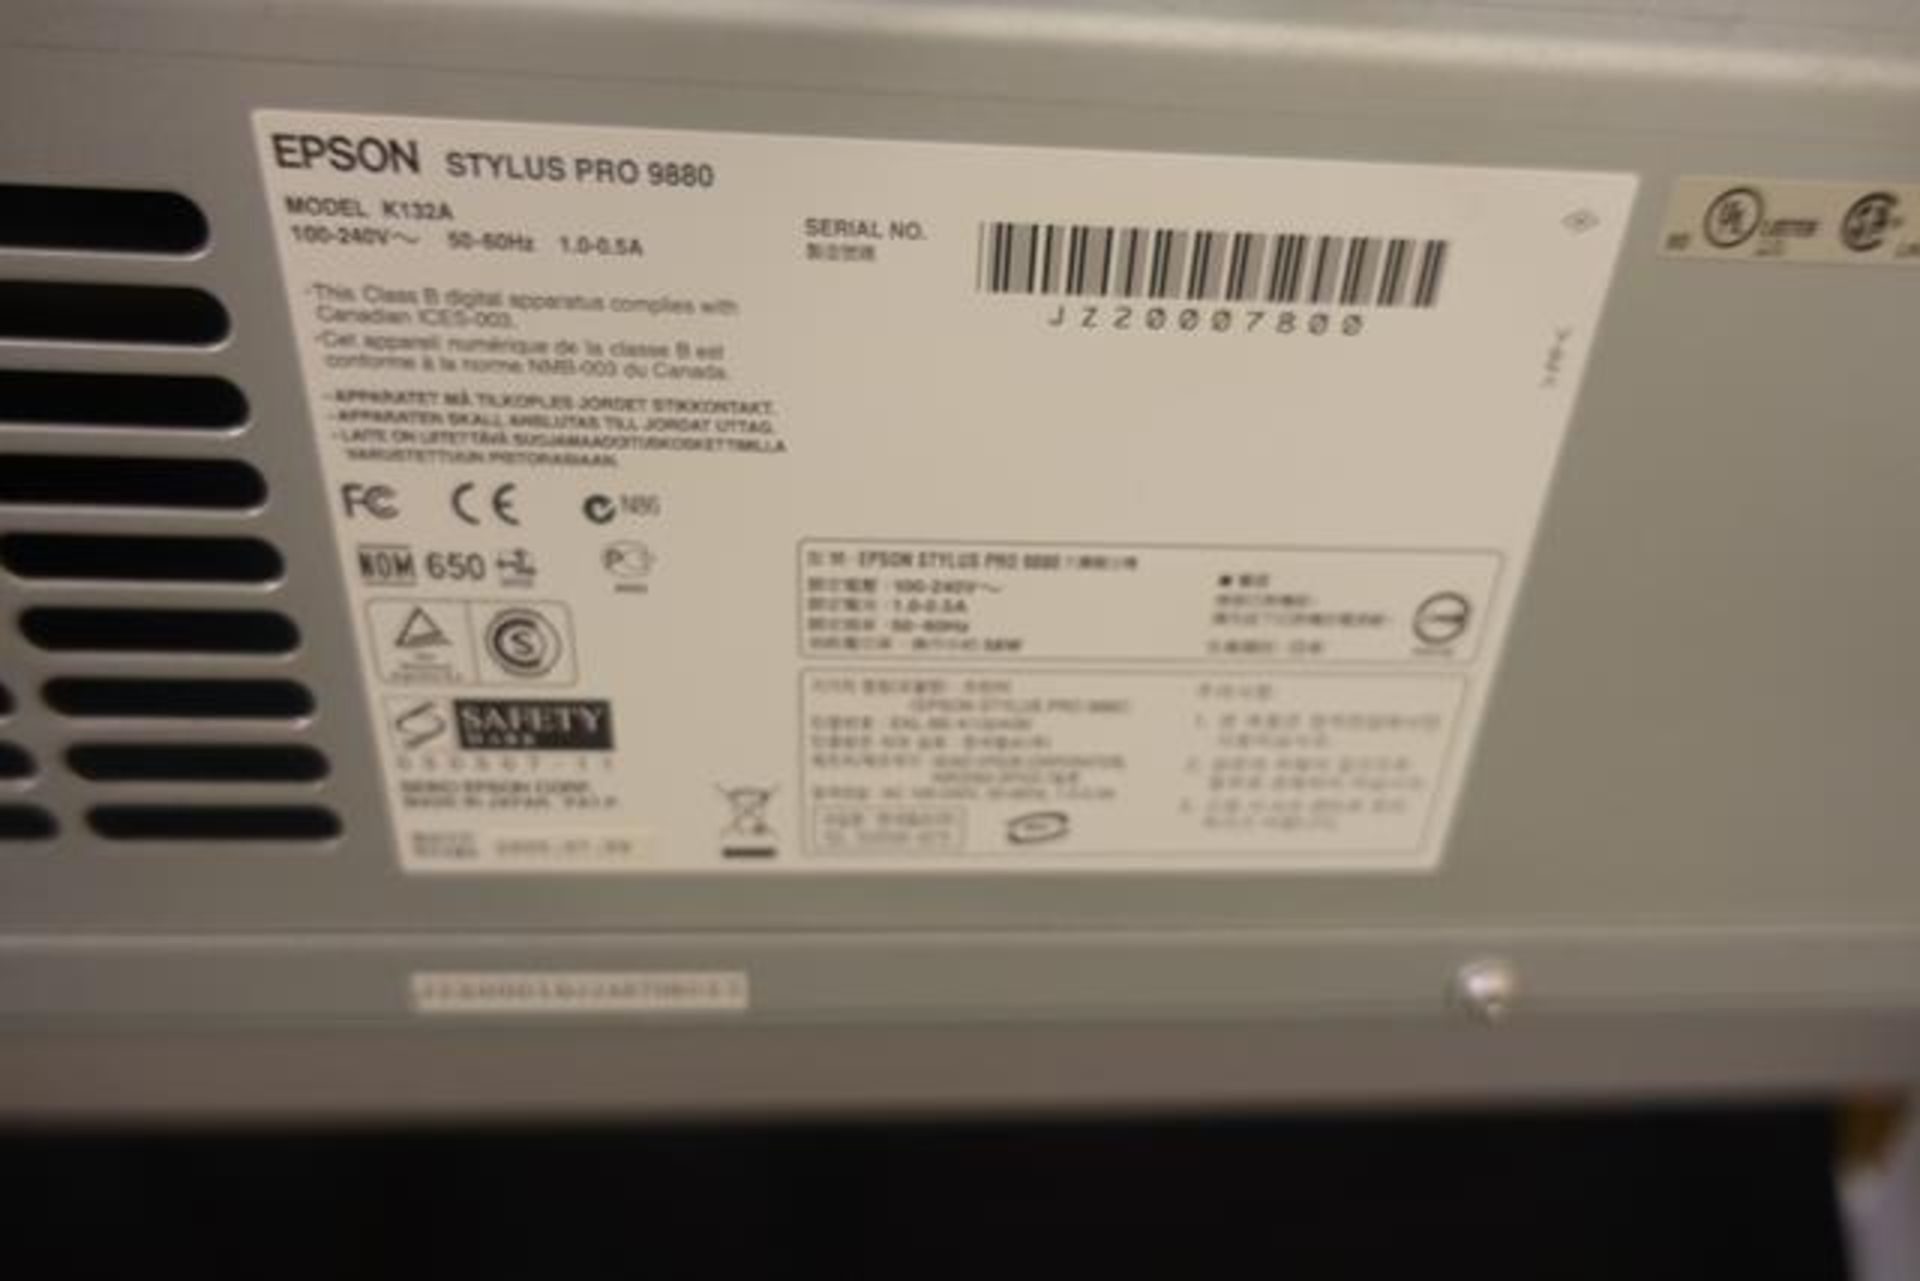 EPSON, K132A, STYLUS PRO 9880 , WIDE FORMAT PRINATER, 2008, S/N JZ20006800 - Image 2 of 2